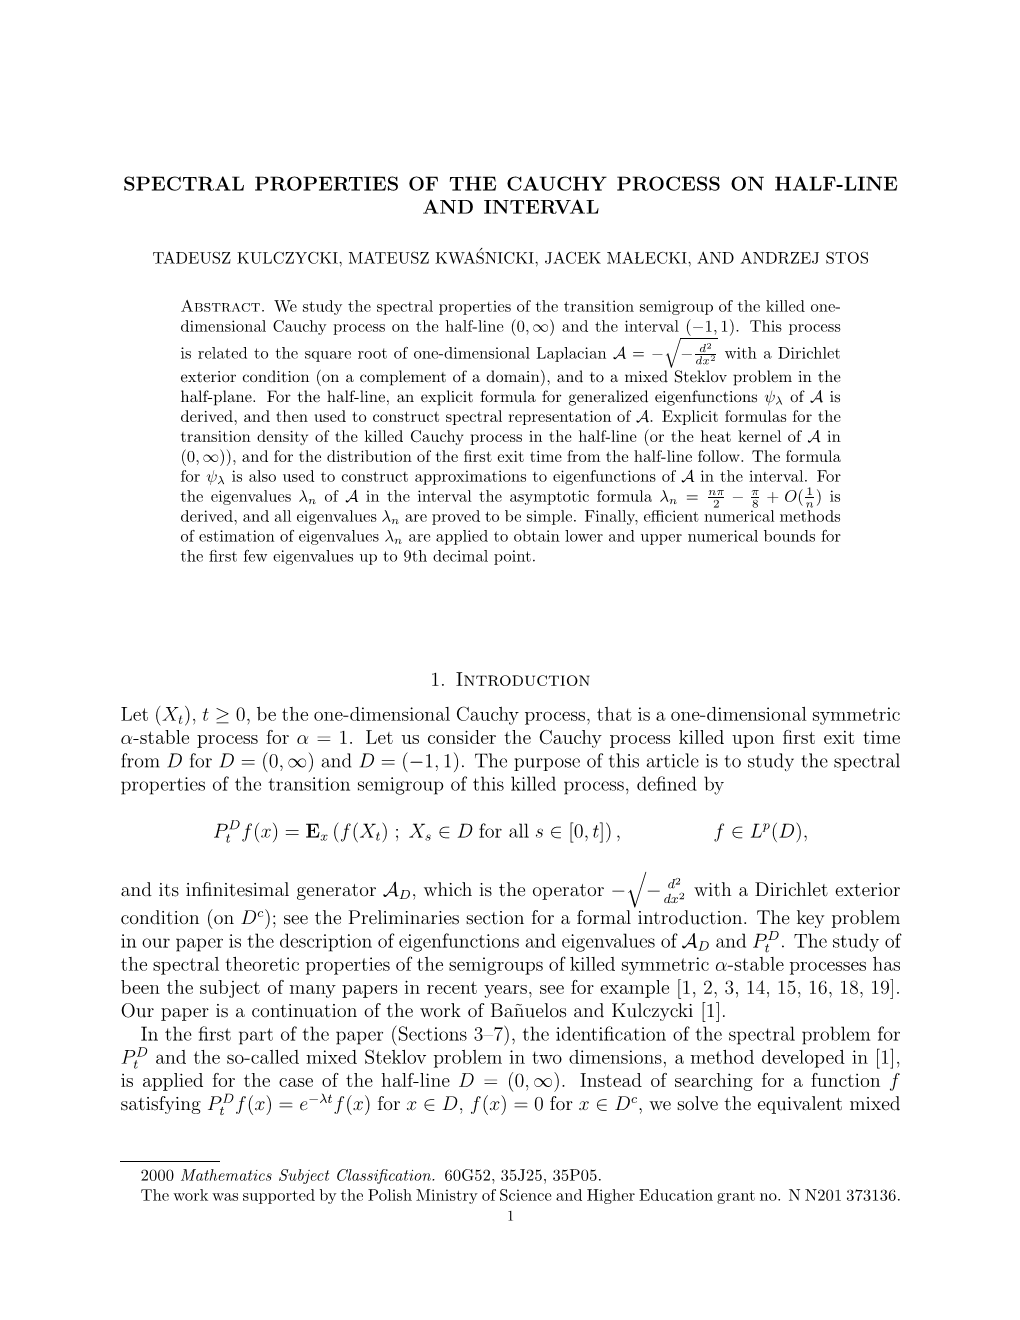 Spectral Properties of the Cauchy Process on Half-Line and Interval